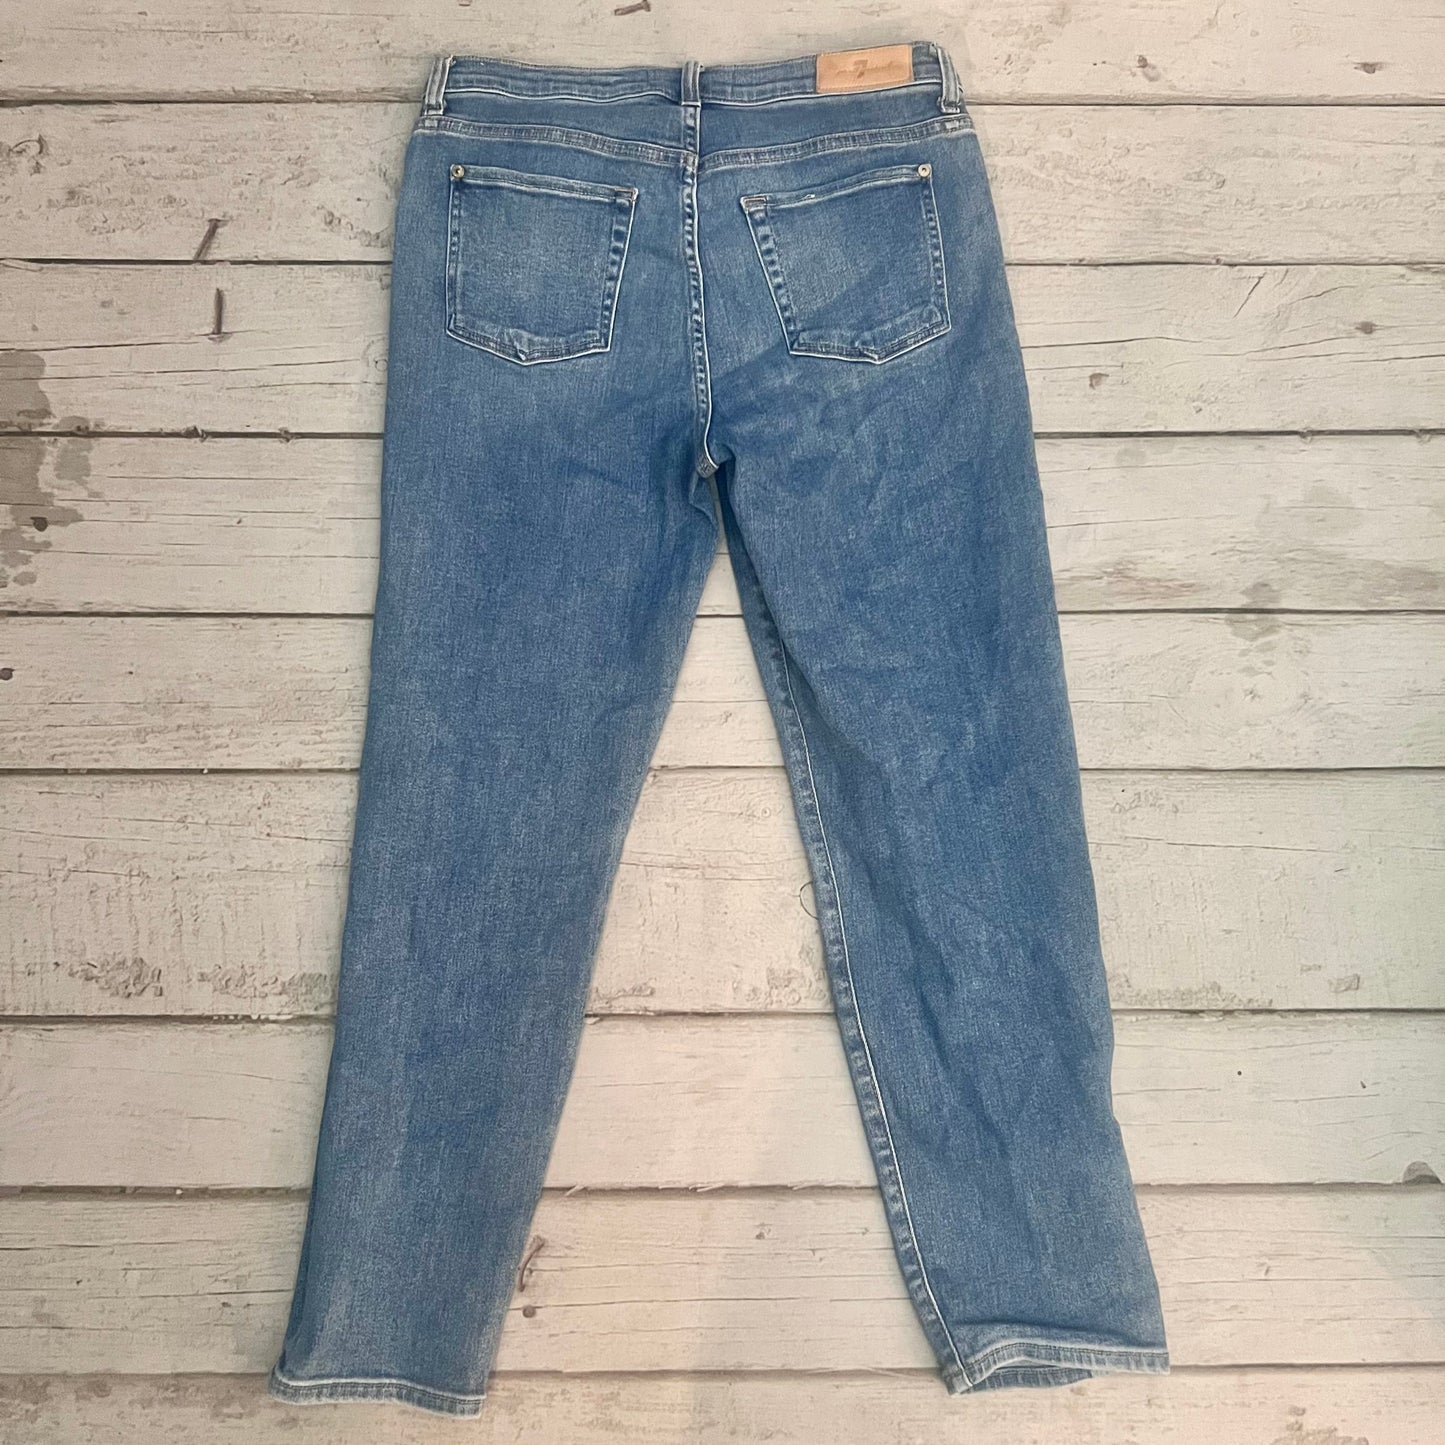 Jeans Skinny By 7 For All Mankind  Size: 8